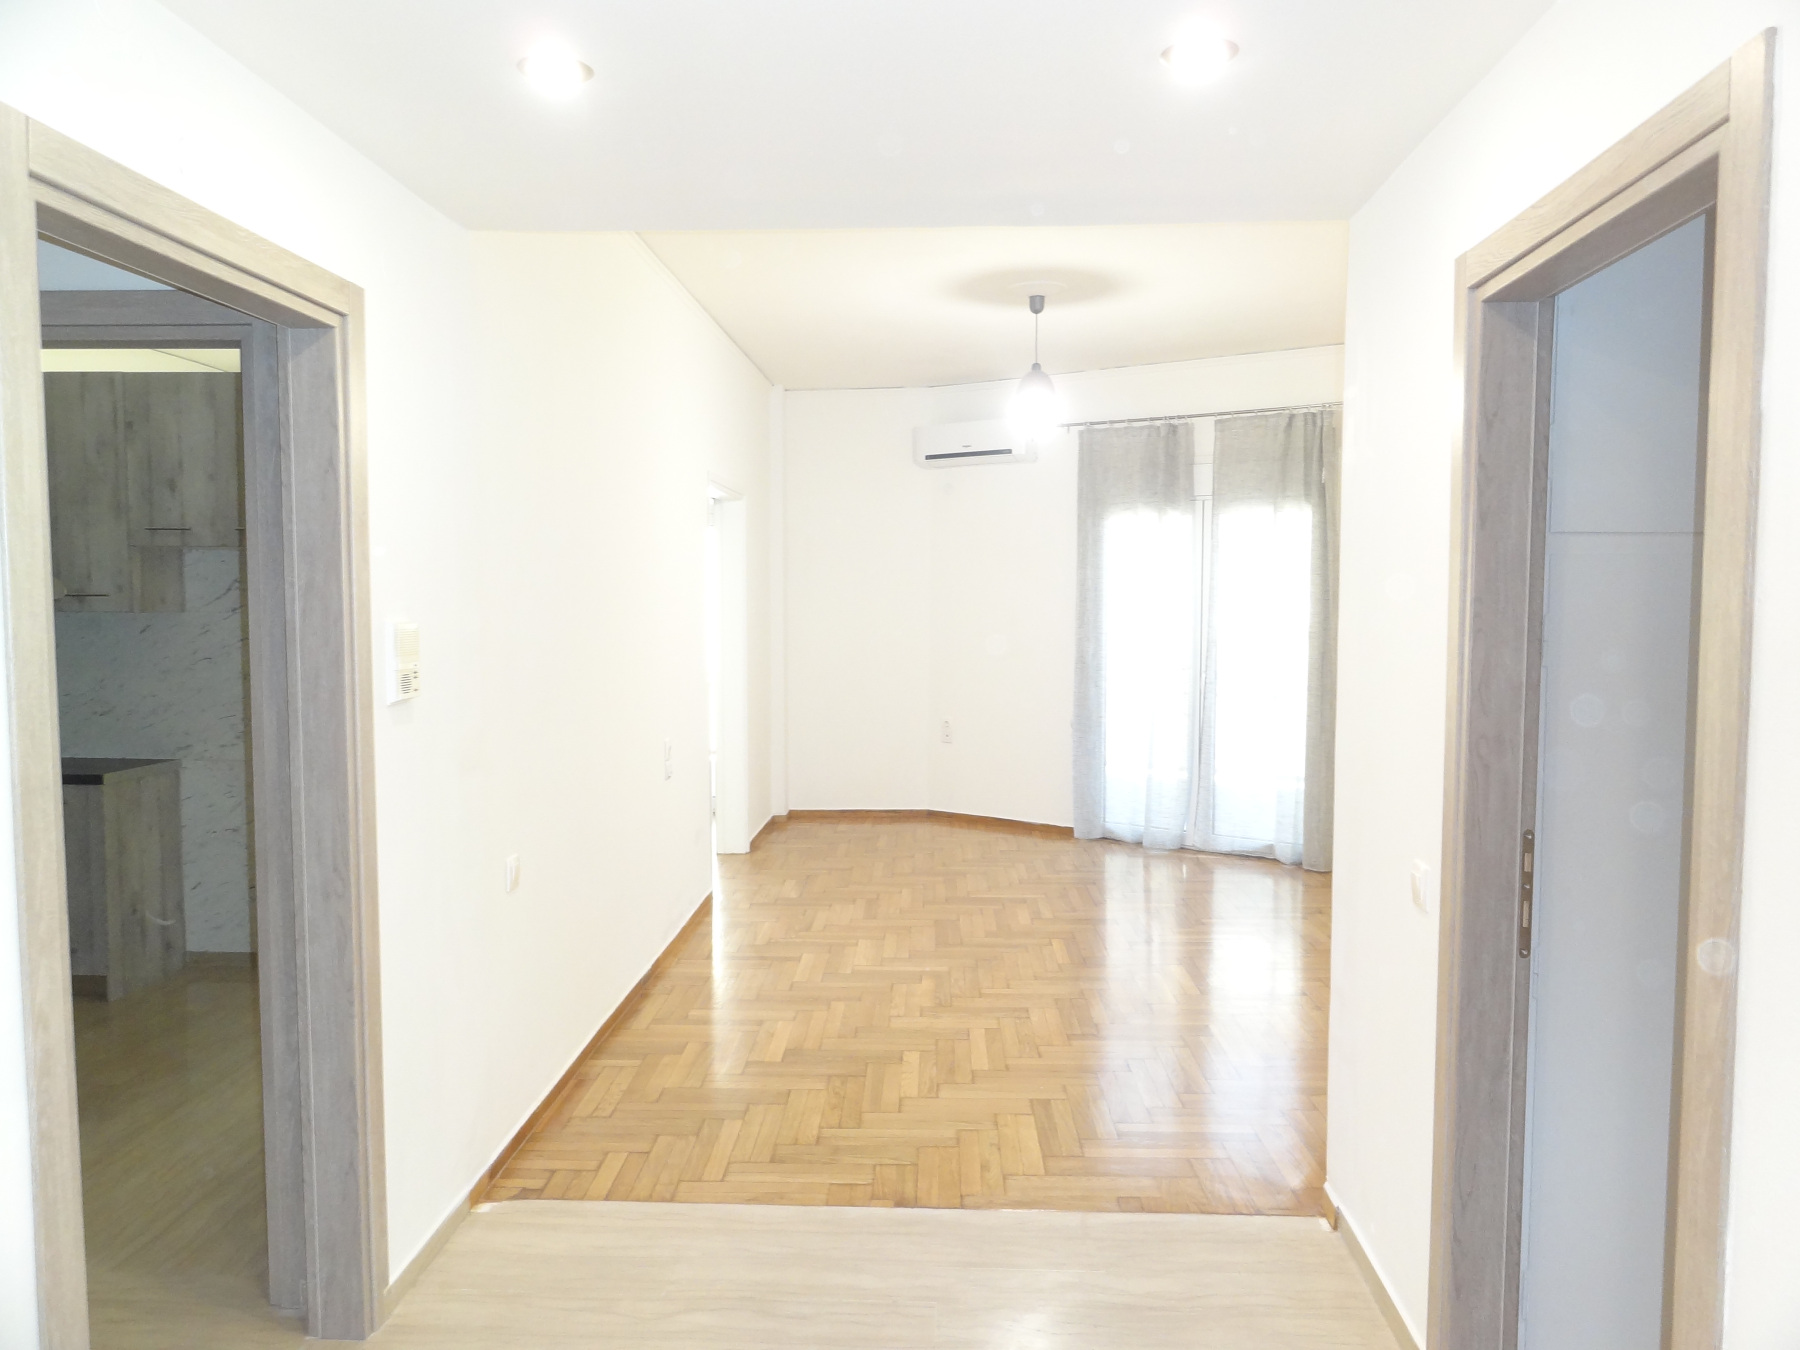 For rent commercial space 100 sq.m. 3rd floor completely renovated in 2022 in the center of Ioannina